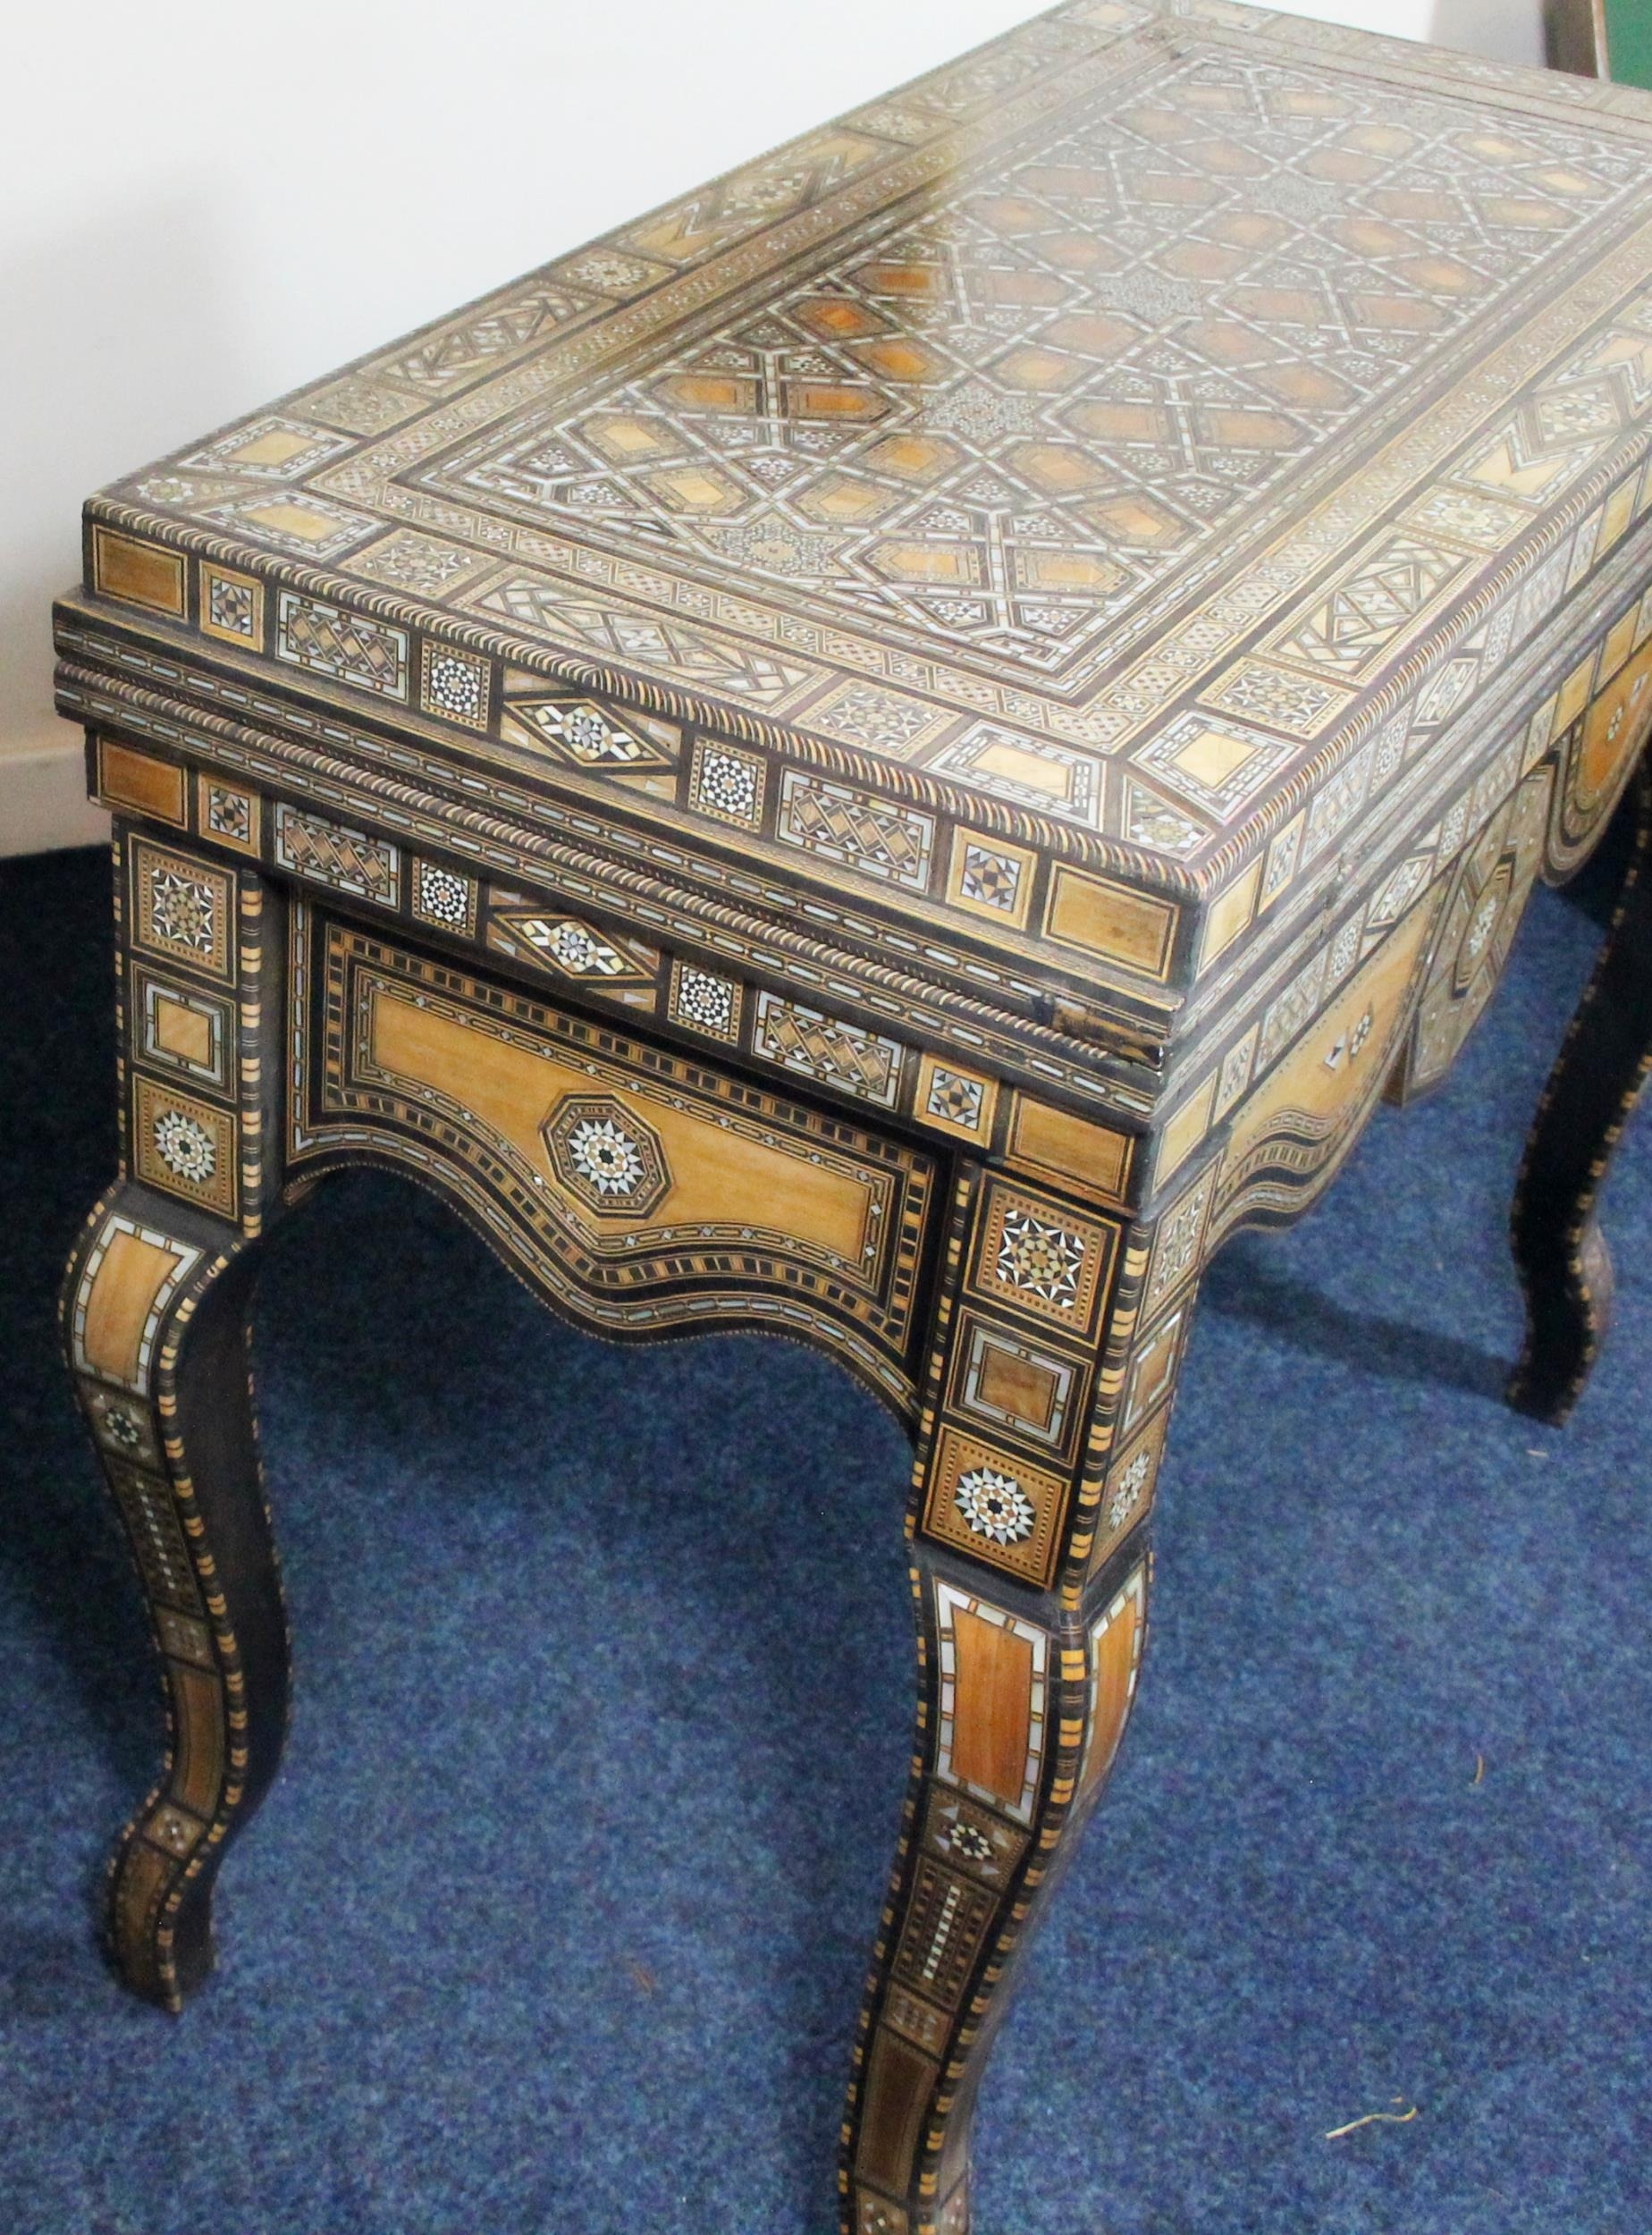 Syrian folding games table of Moorish design, mid 20th century, the elaborately inlaid mother of - Image 4 of 8